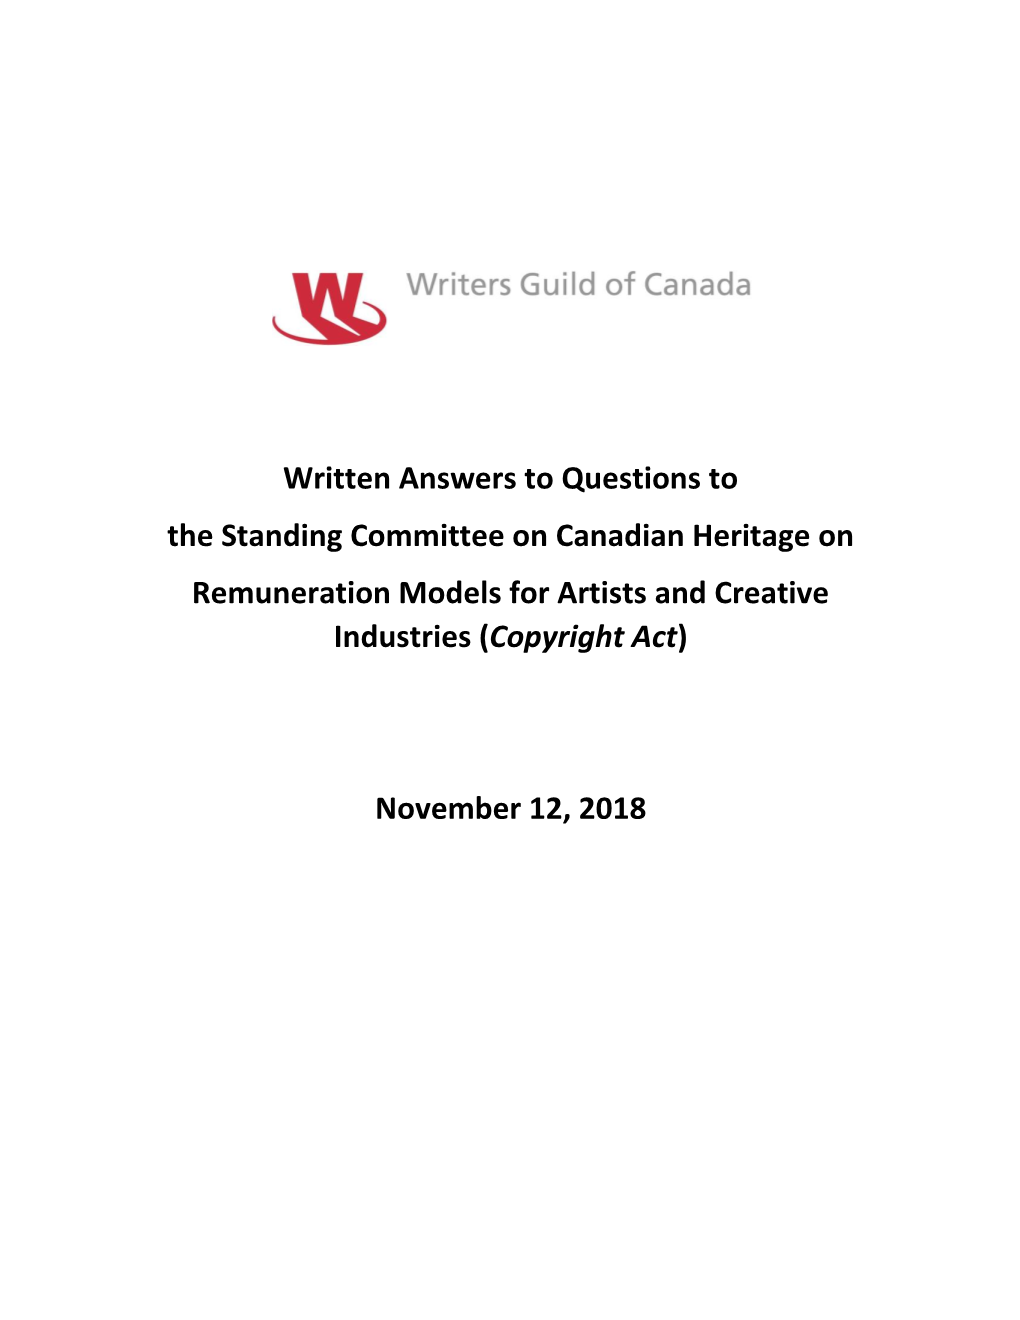 Written Answers to Questions to the Standing Committee on Canadian Heritage on Remuneration Models for Artists and Creative Industries (Copyright Act)